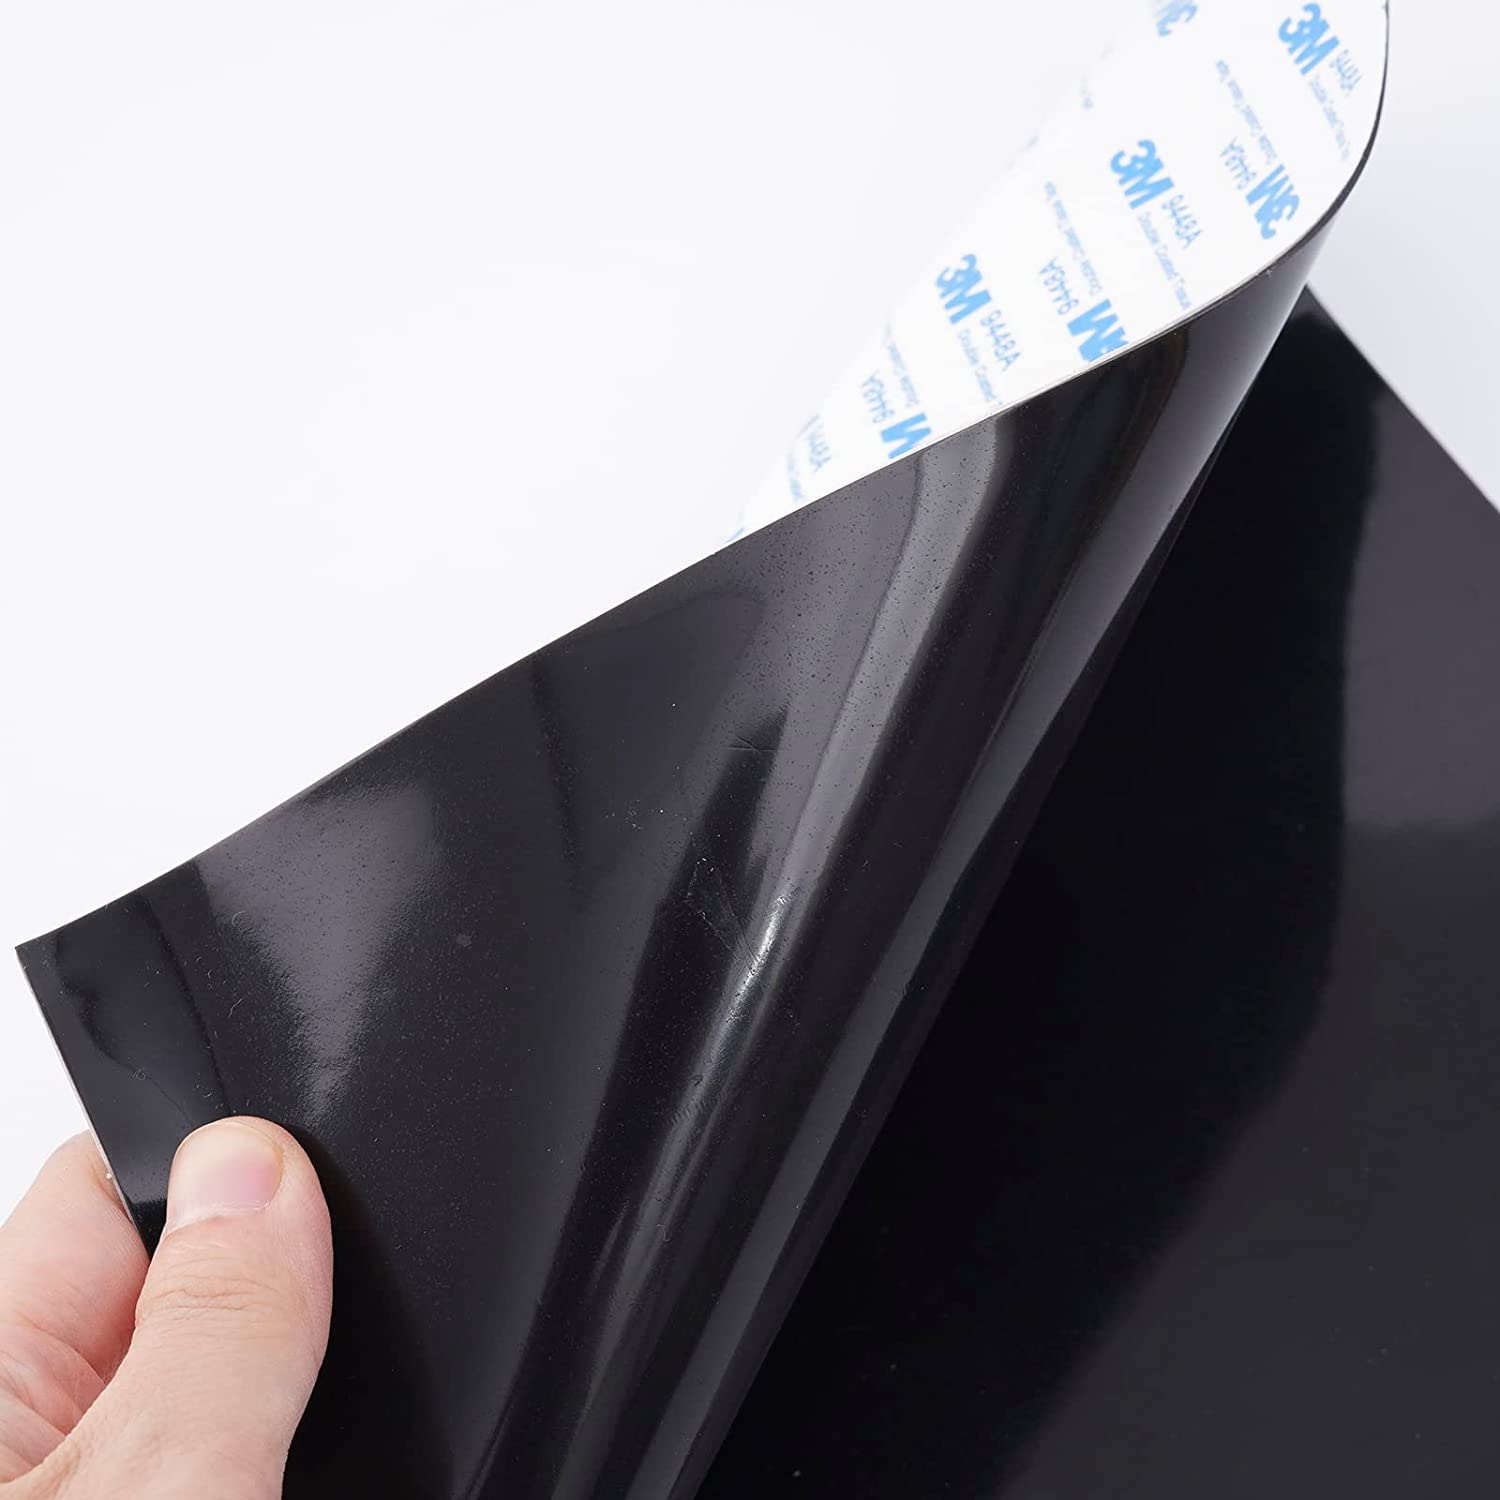 Adhesive Black Rubber Pad Sheet Thin Silicone Rubber Gasket Sheet 12X12 inch DIY Material, Supports, Leveling, Sealing, Bumpers, Protection - Paidu Supplier